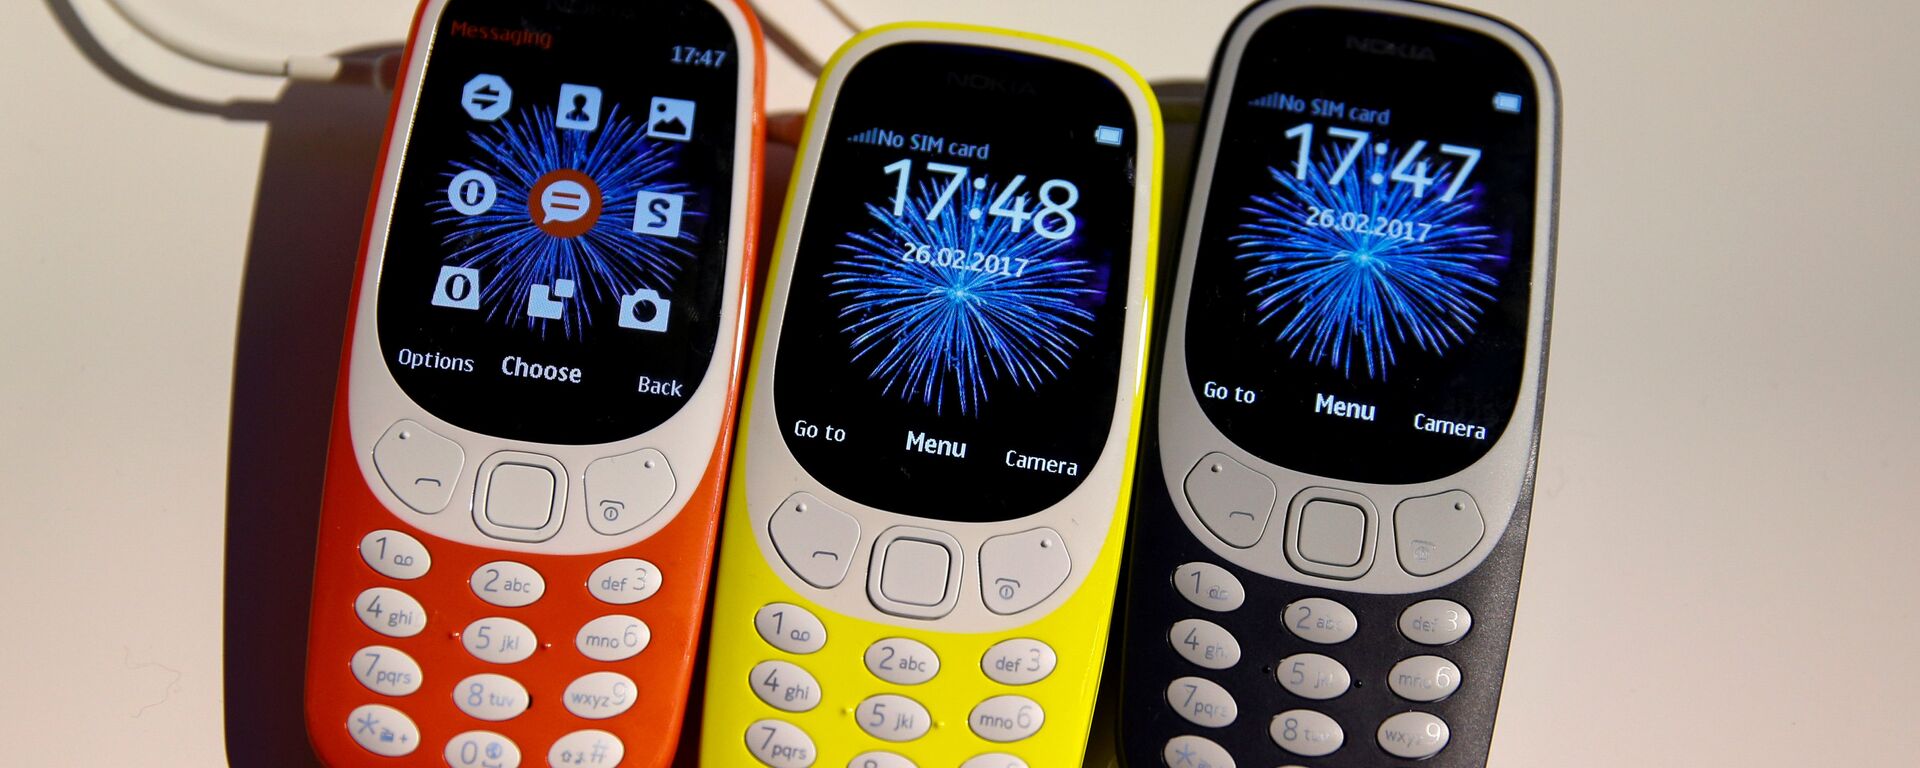 Nokia 3310 devices are displayed after their presentation ceremony at Mobile World Congress in Barcelona, Spain, February 26, 2017. - Sputnik Mundo, 1920, 08.08.2021